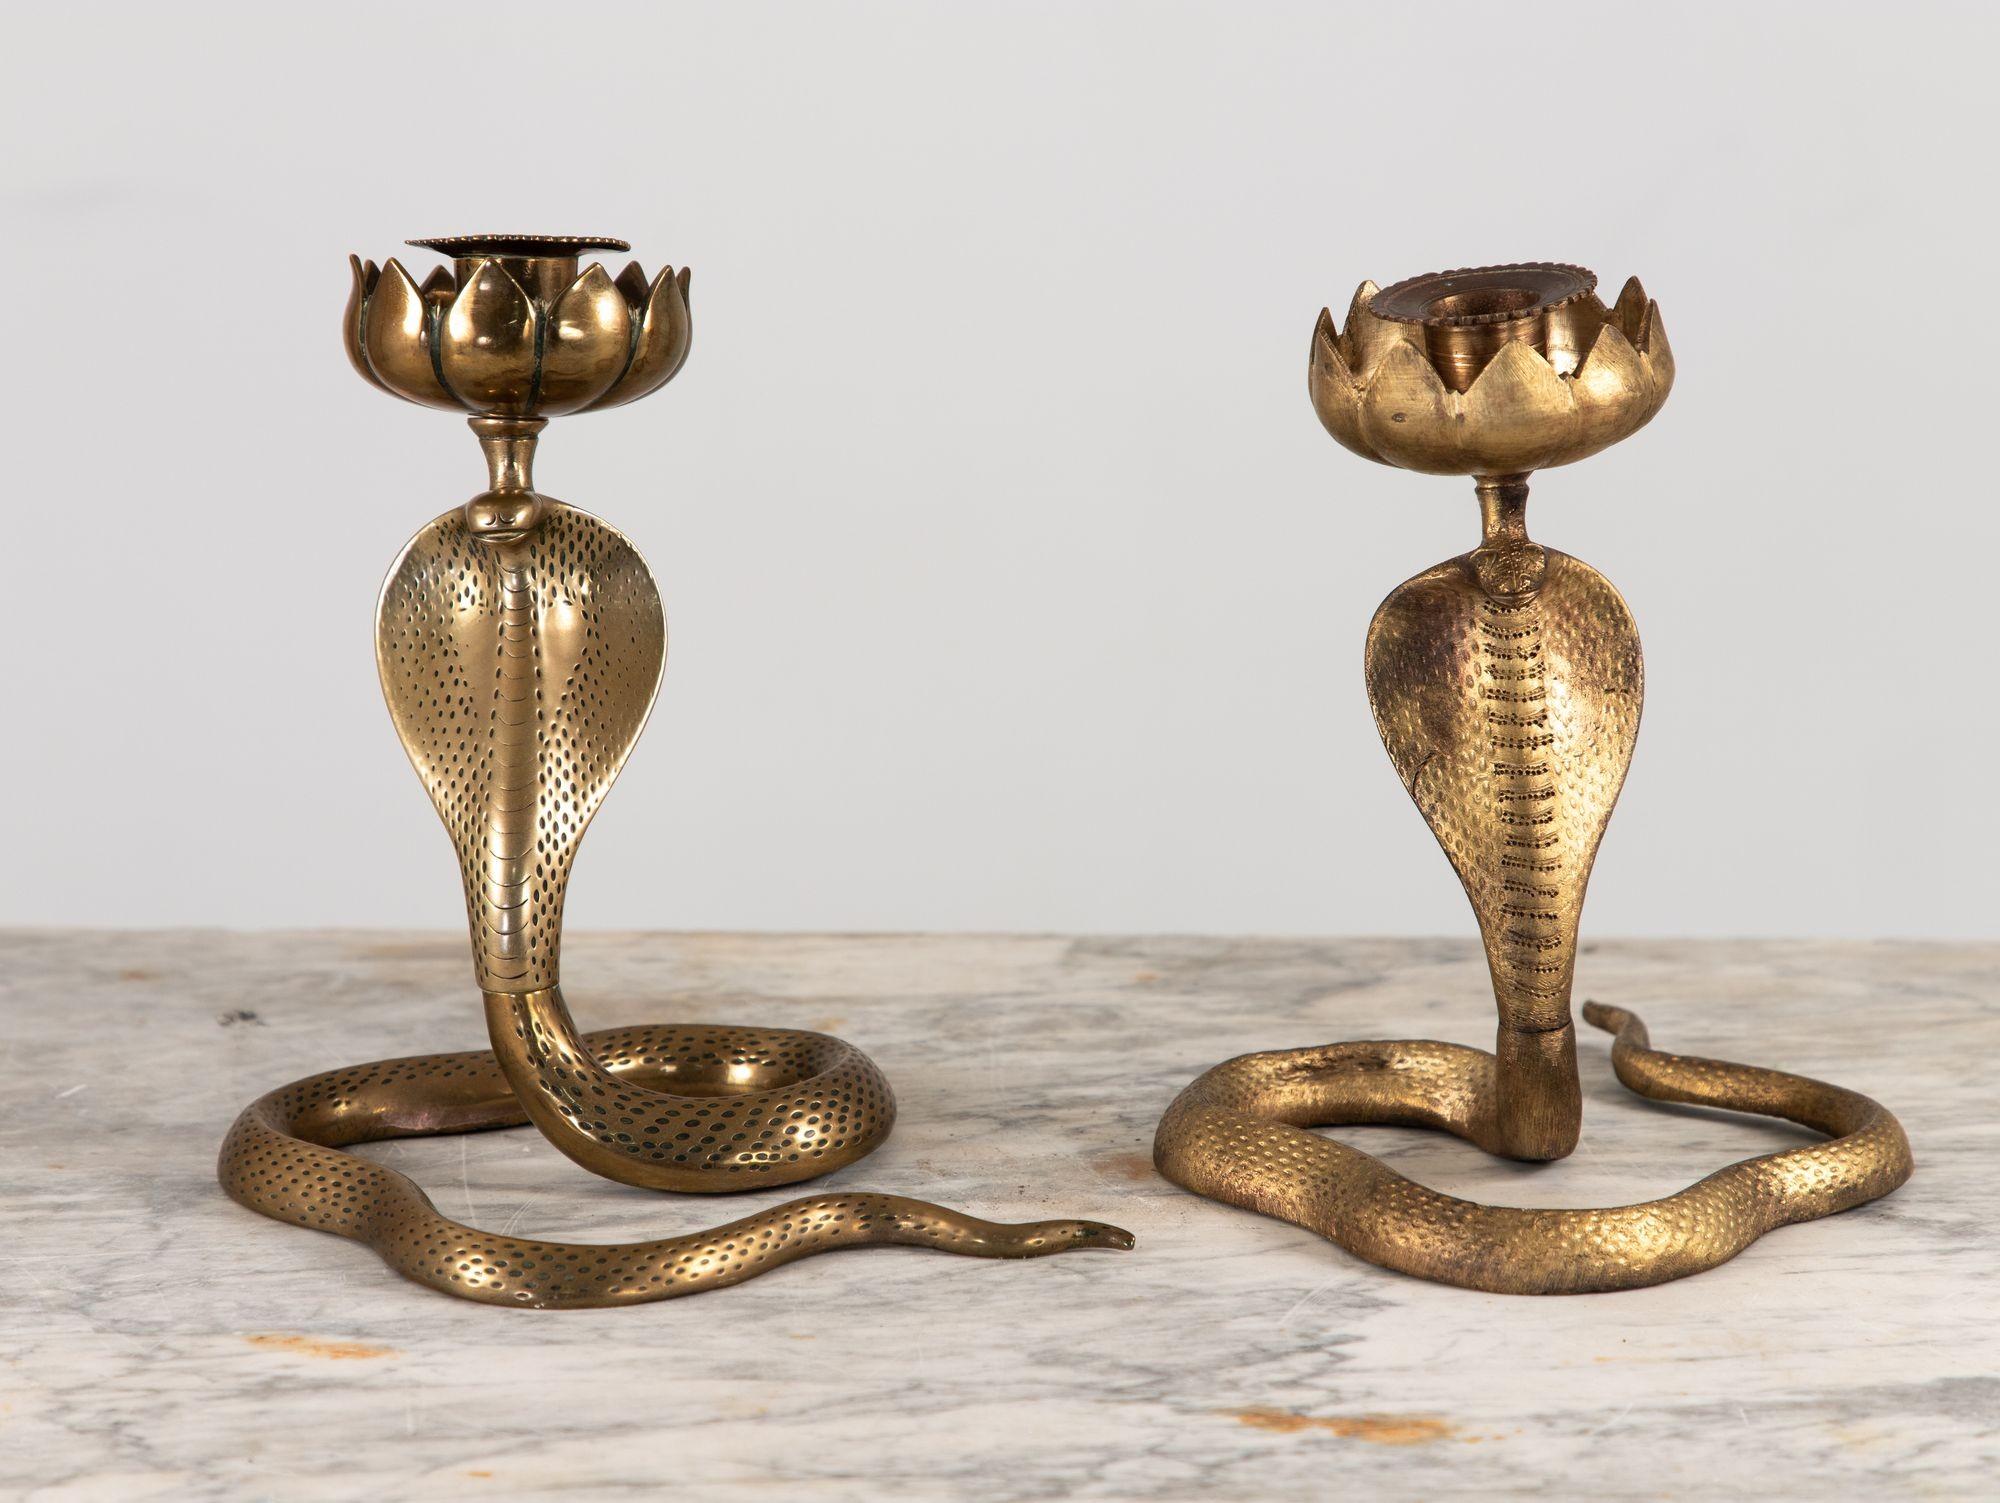 These exquisite brass candlesticks embody the captivating allure of the cobra. Standing proudly at a height of 8 inches, each candlestick is a masterful work of art crafted with stunning attention to detail. The sinuous bodies of the cobras coil